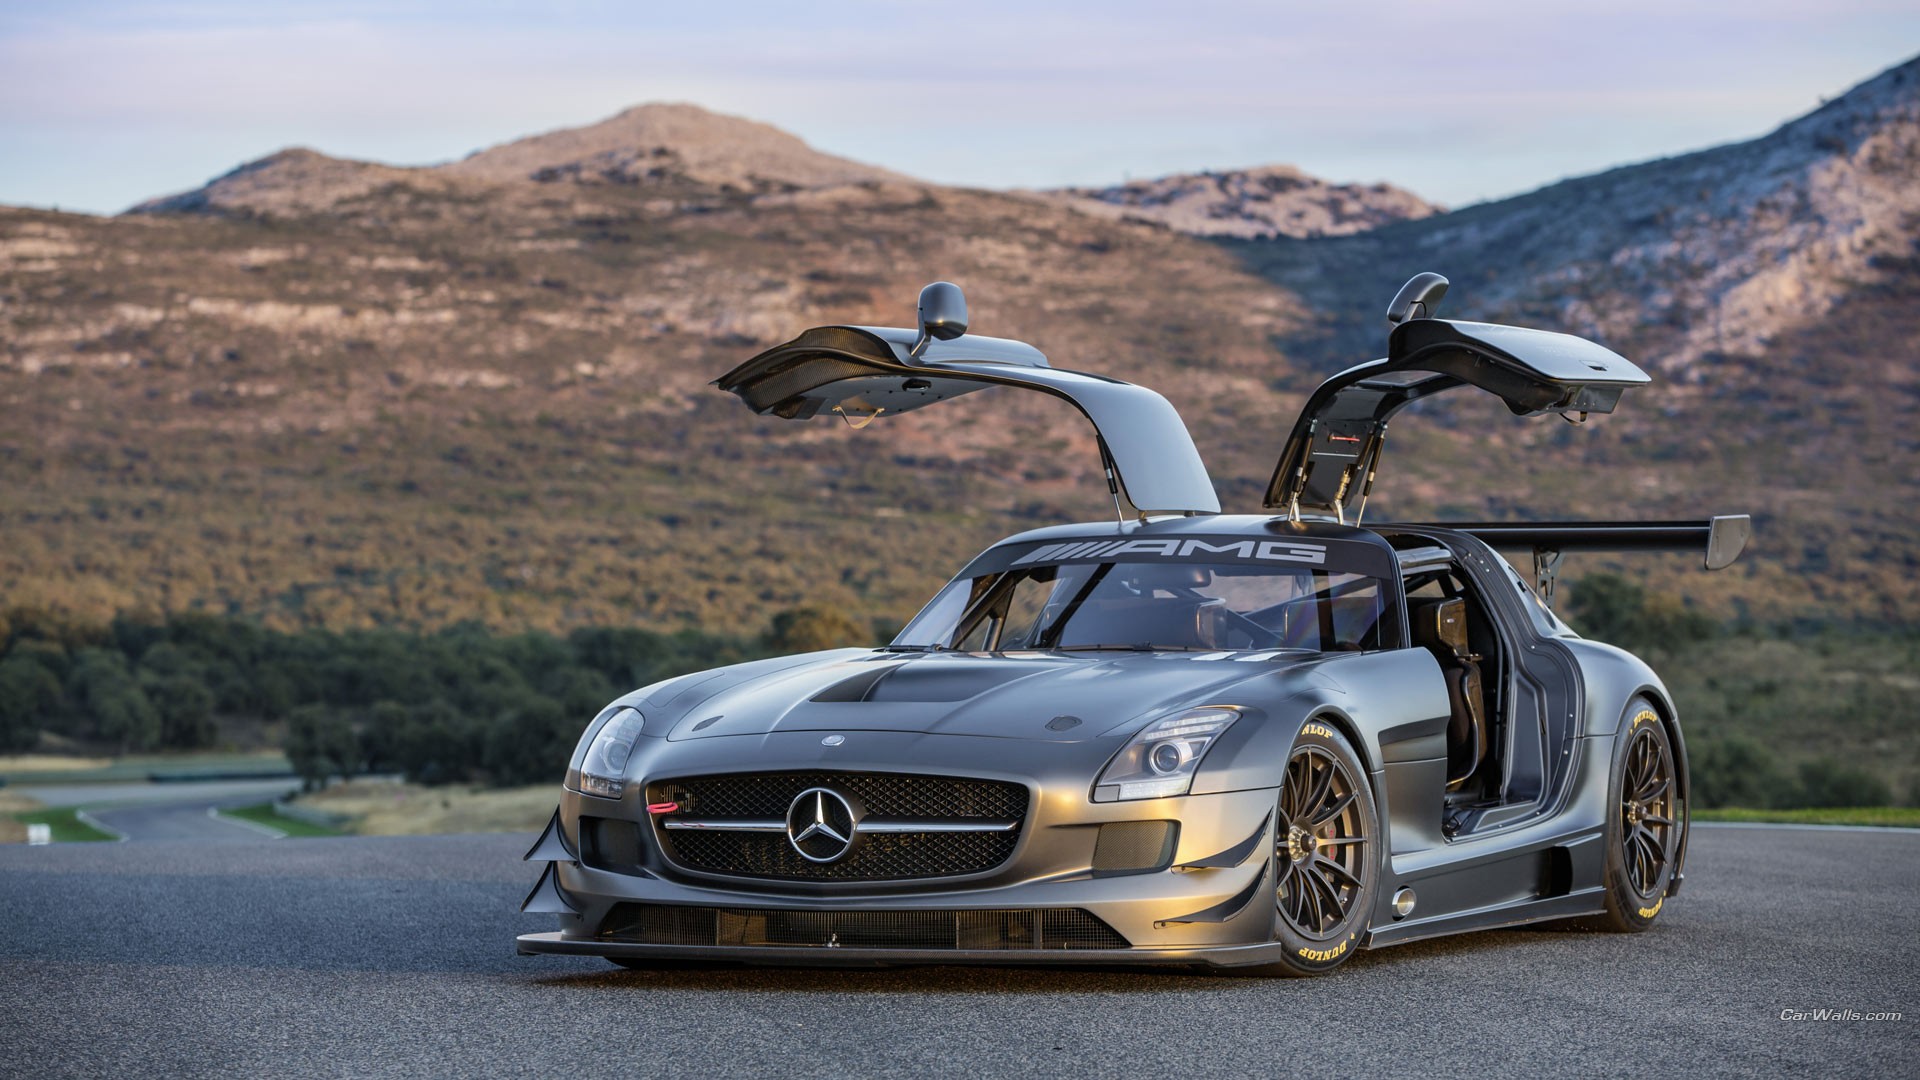 General 1920x1080 Mercedes-Benz SLS AMG German cars race cars coupe Mercedes-Benz car spoiler Grand Tour car watermarked frontal view sunlight